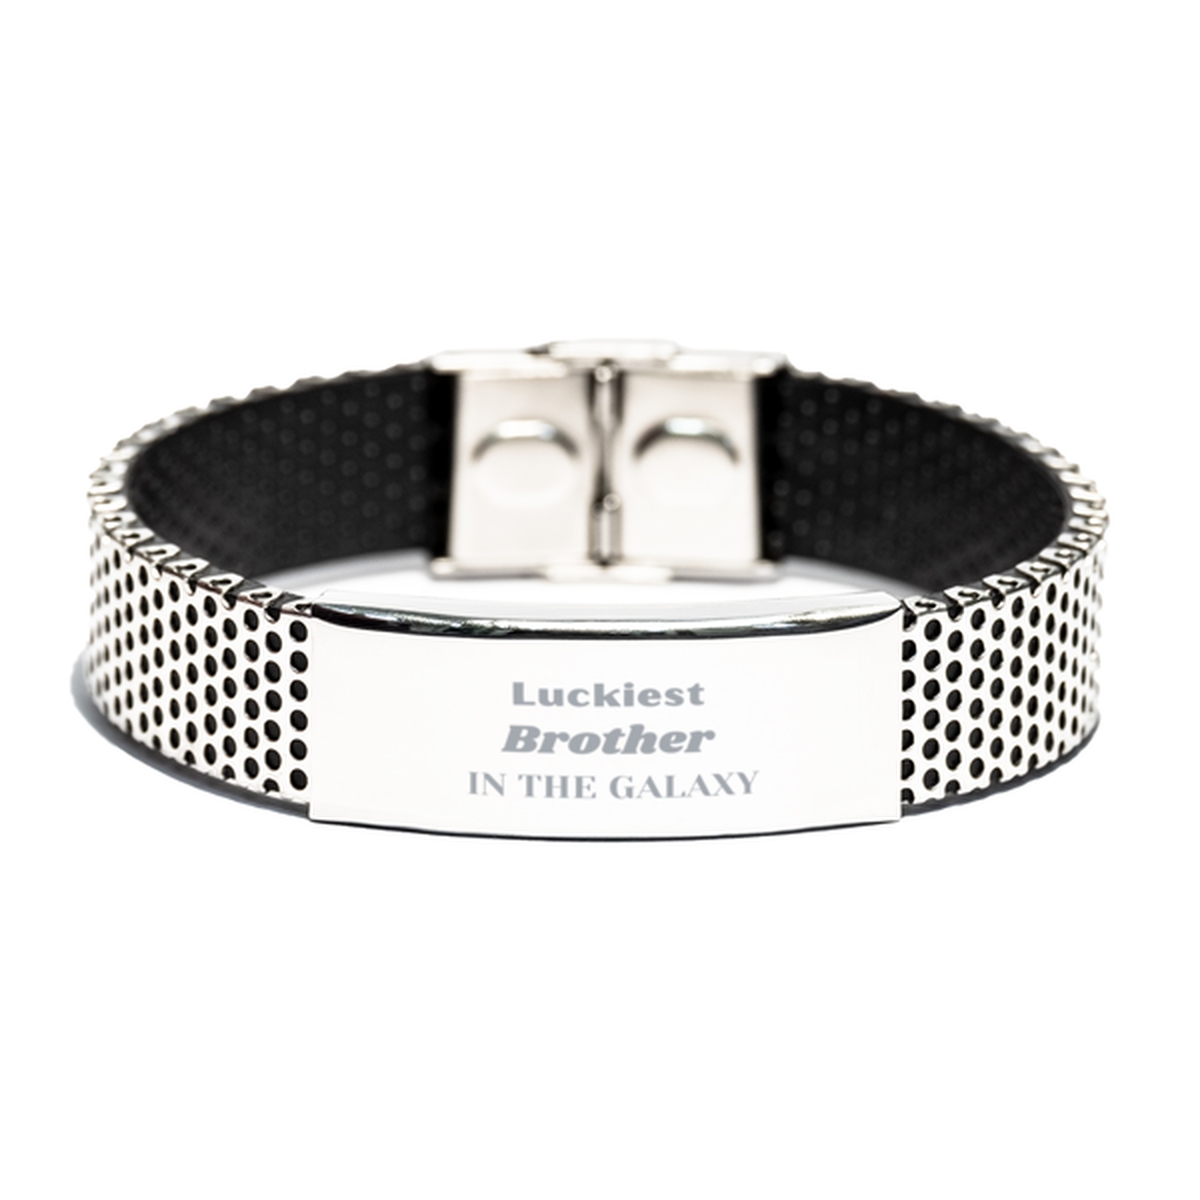 Luckiest Brother in the Galaxy, To My Brother Engraved Gifts, Christmas Brother Stainless Steel Bracelet Gifts, X-mas Birthday Unique Gifts For Brother Men Women